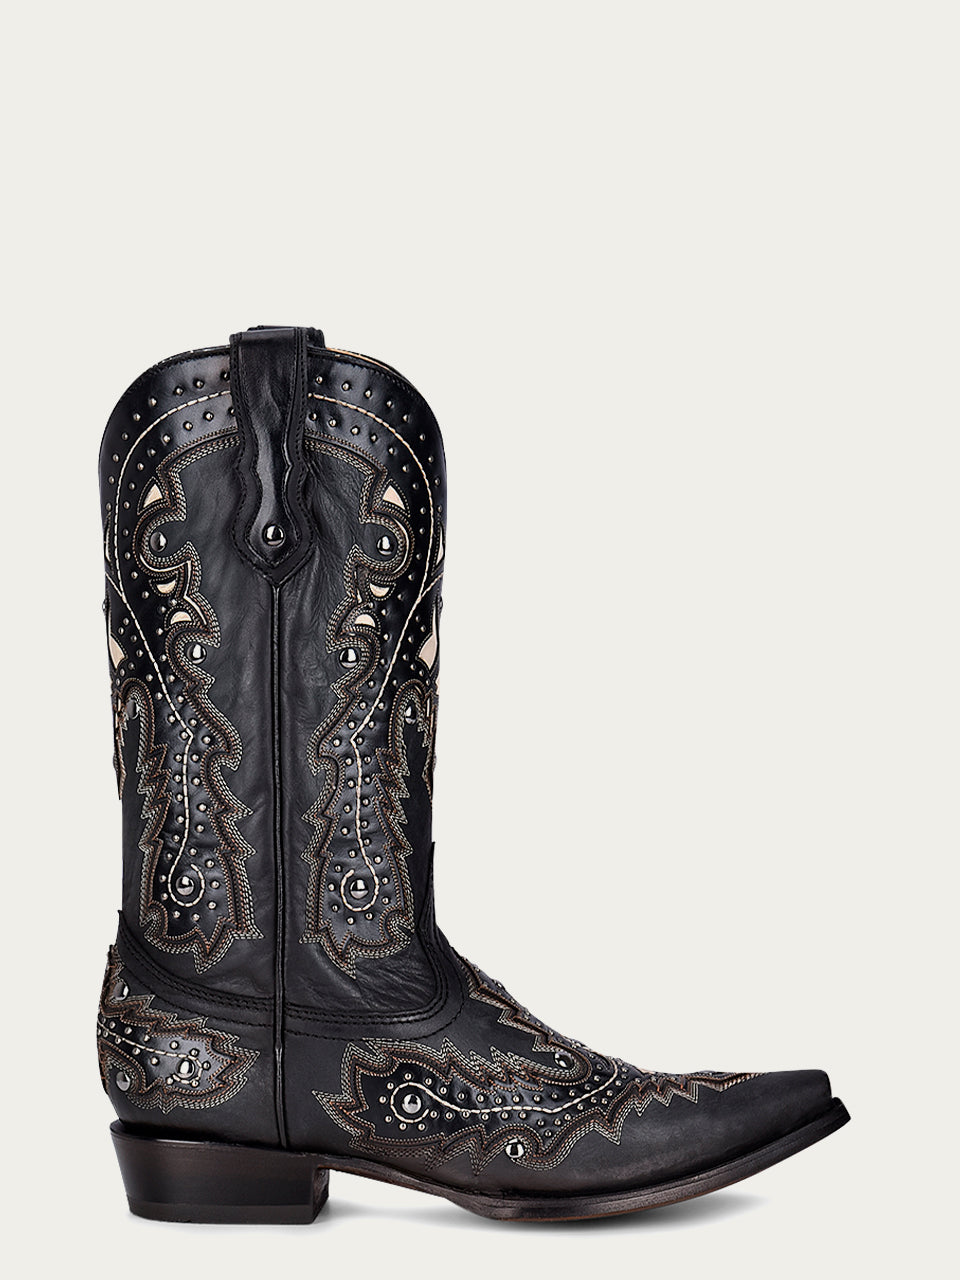 Corral Men's White Inlay Embroidered Snip Toe Black Cowboy Boots - Dudes Boutique